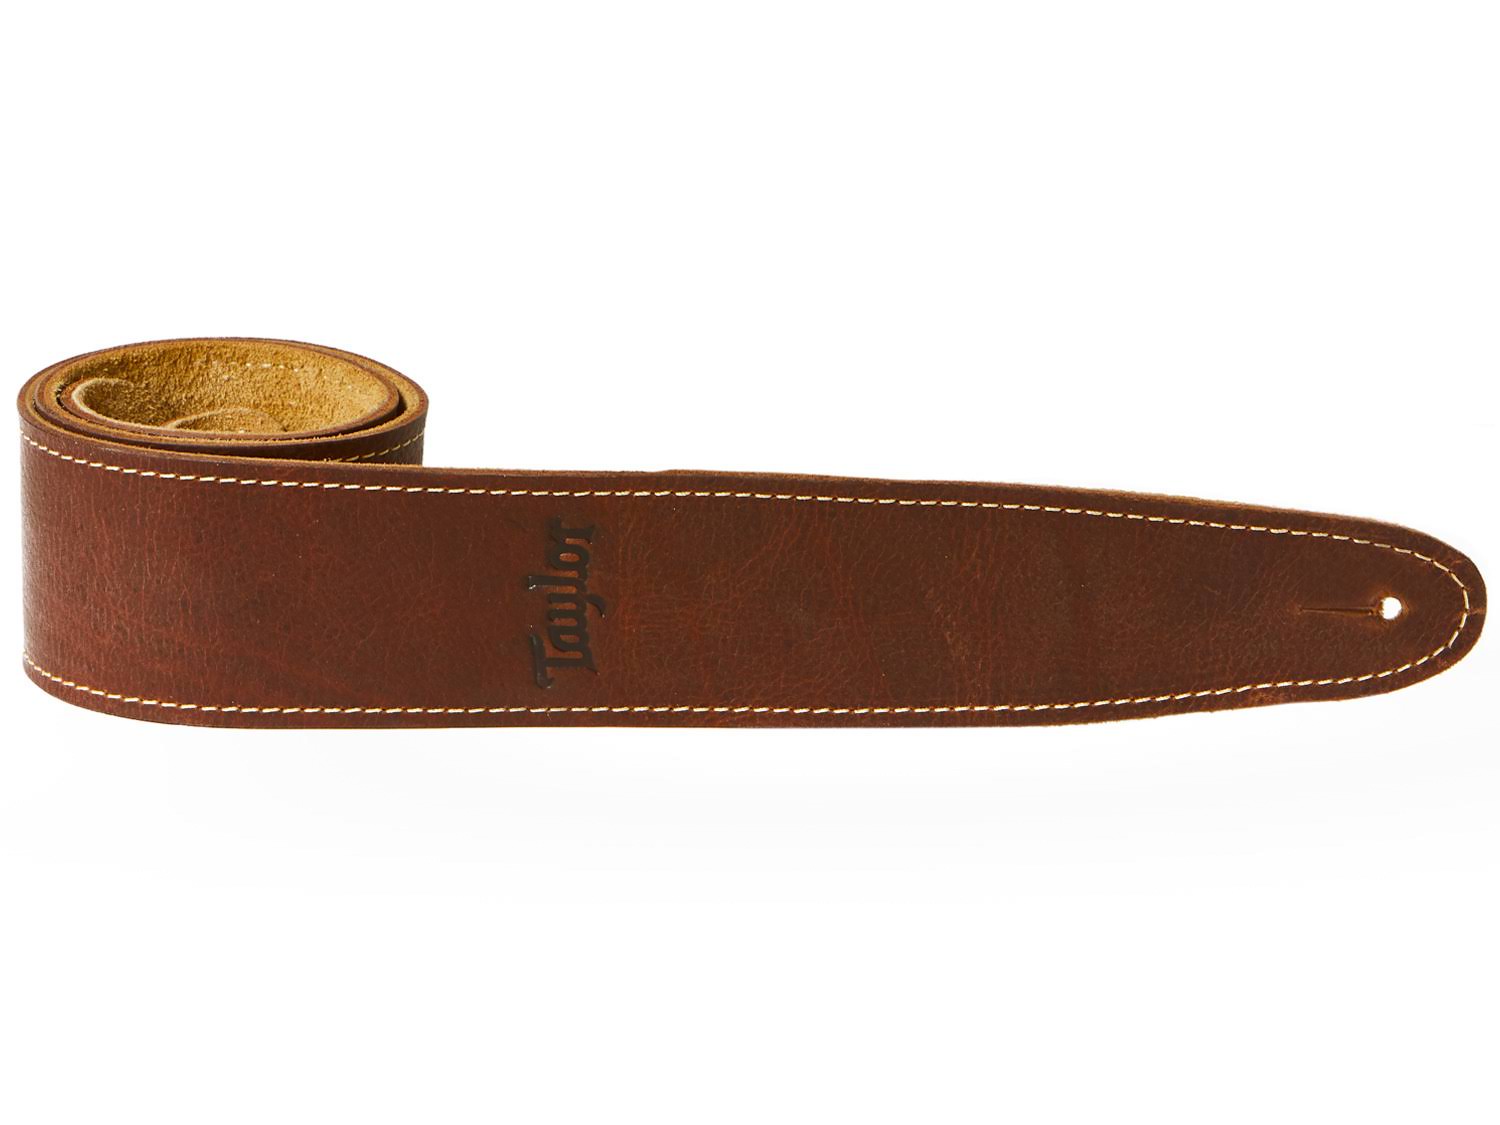 Taylor Leather/Suede Strap - Medium Brown 2.5"